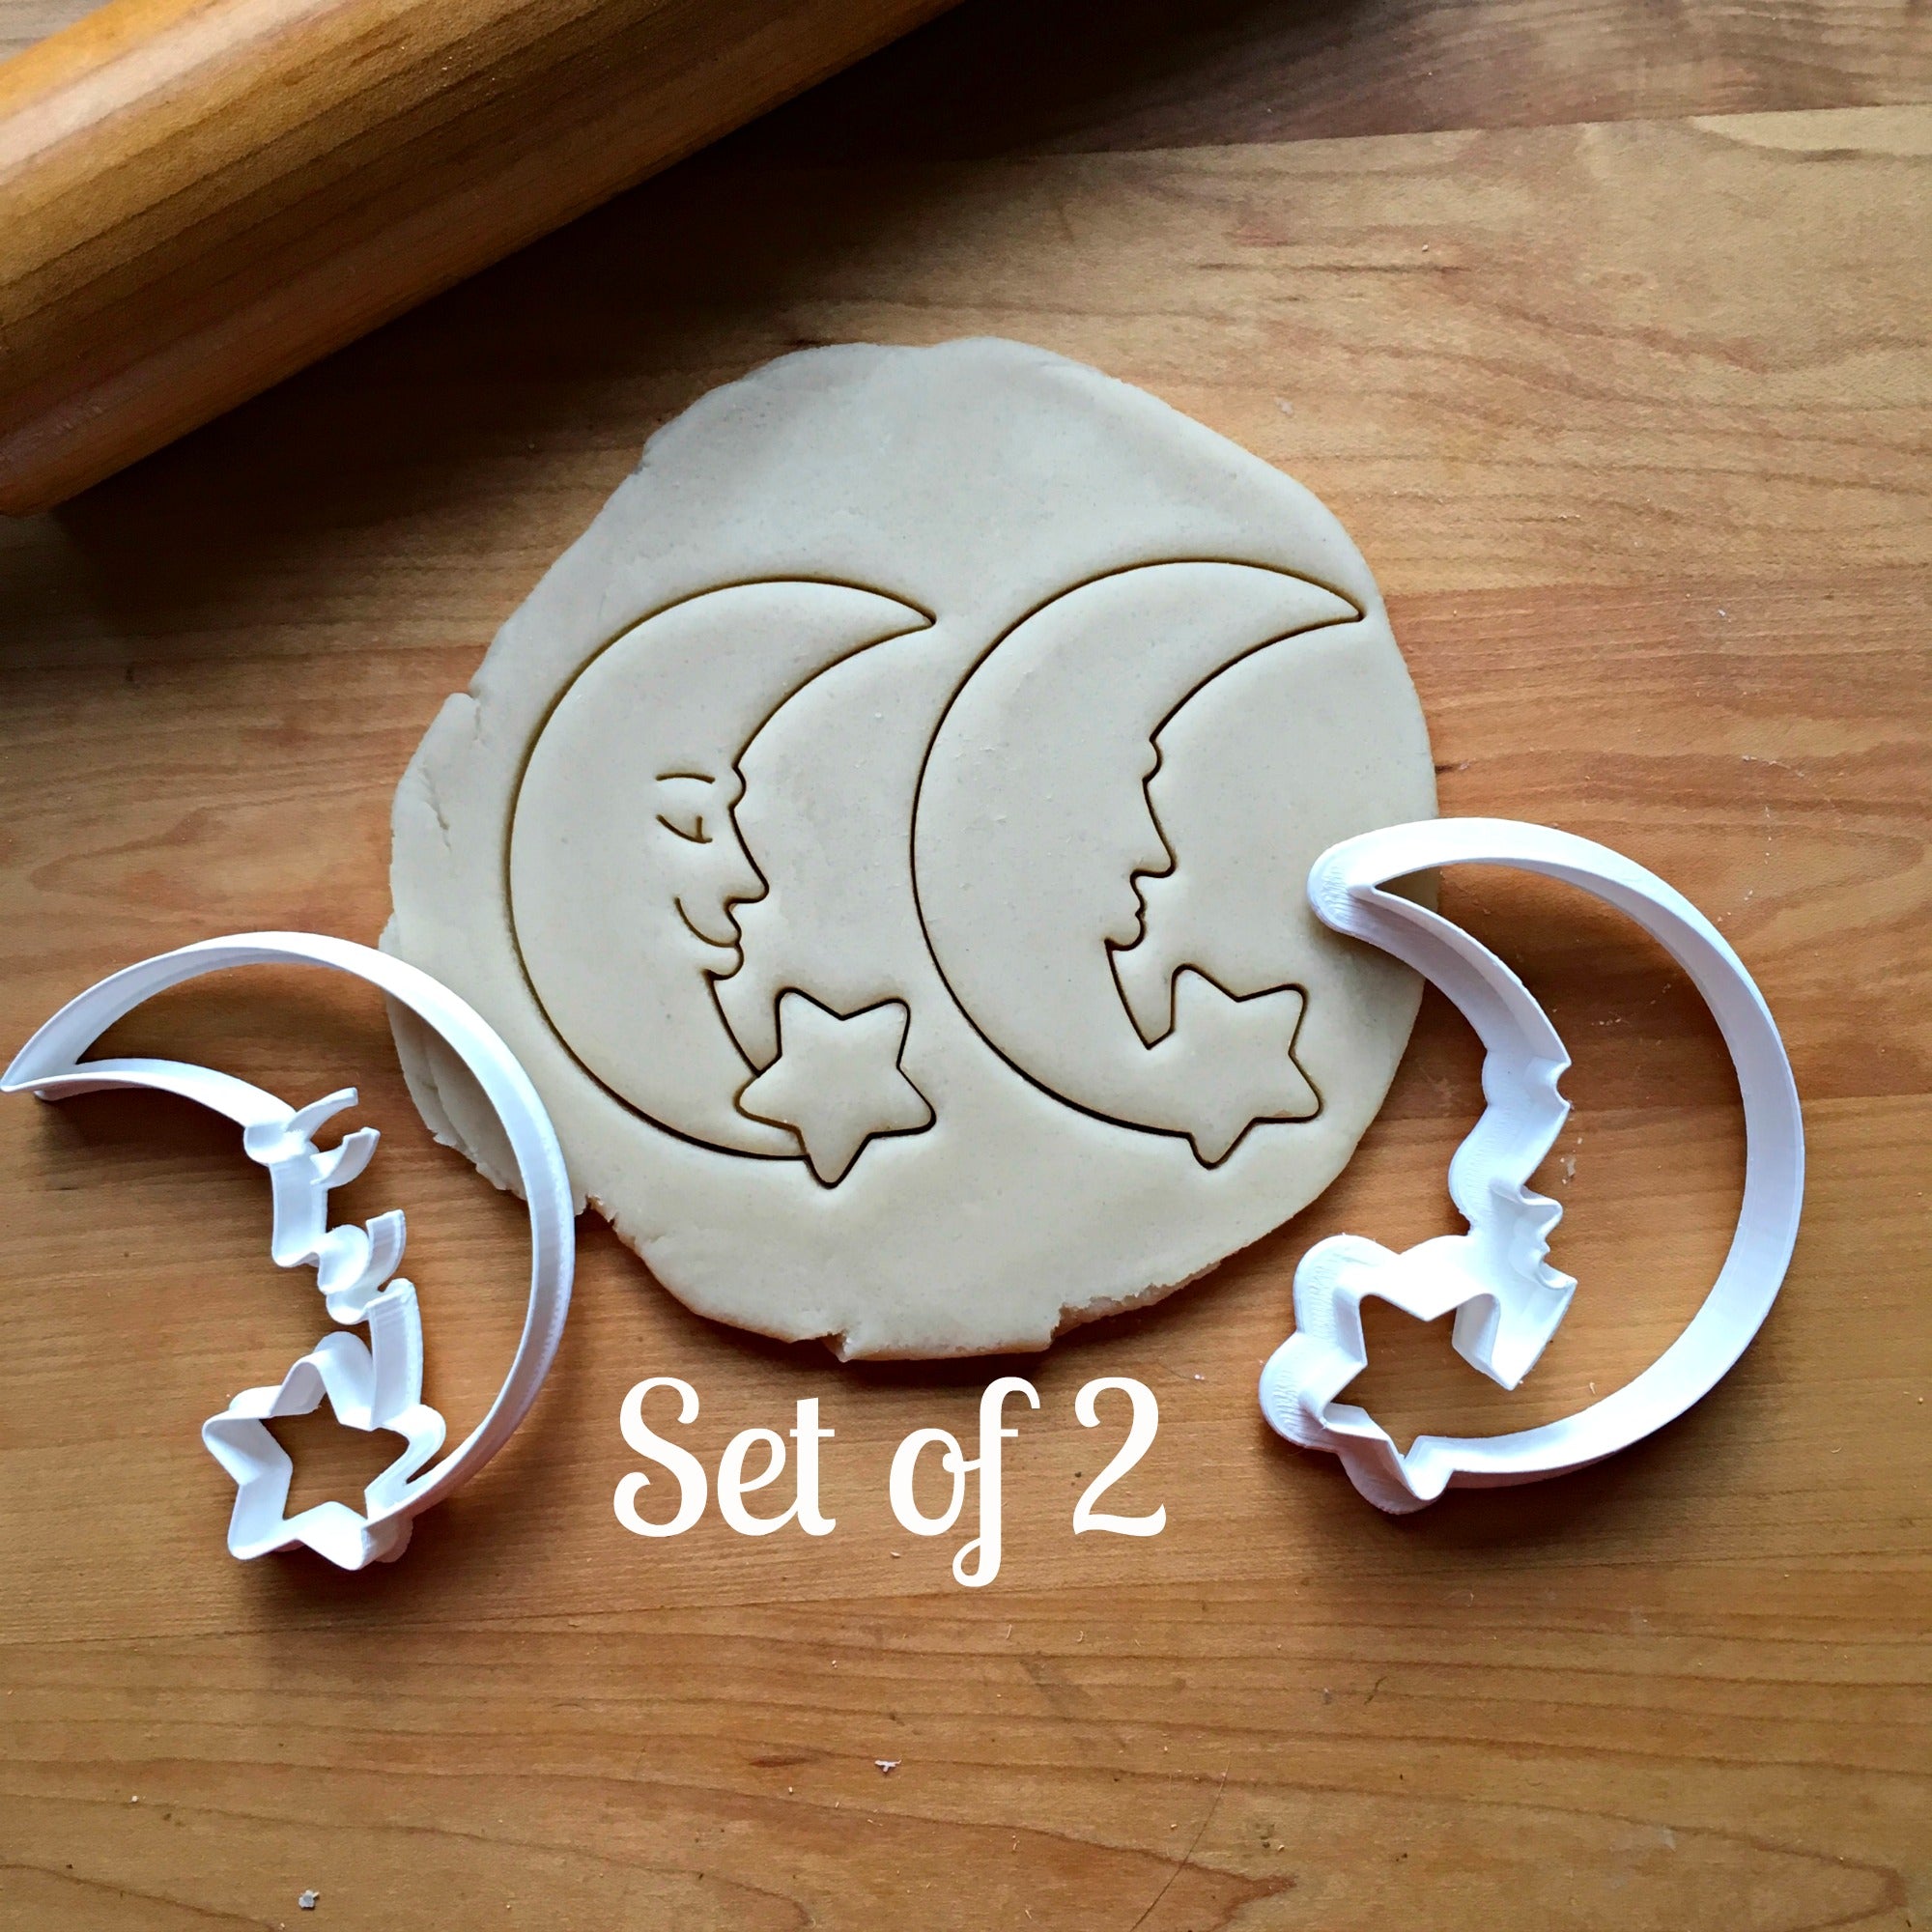 Set of 2 Crescent Moon and Star Cookie Cutters/Dishwasher Safe